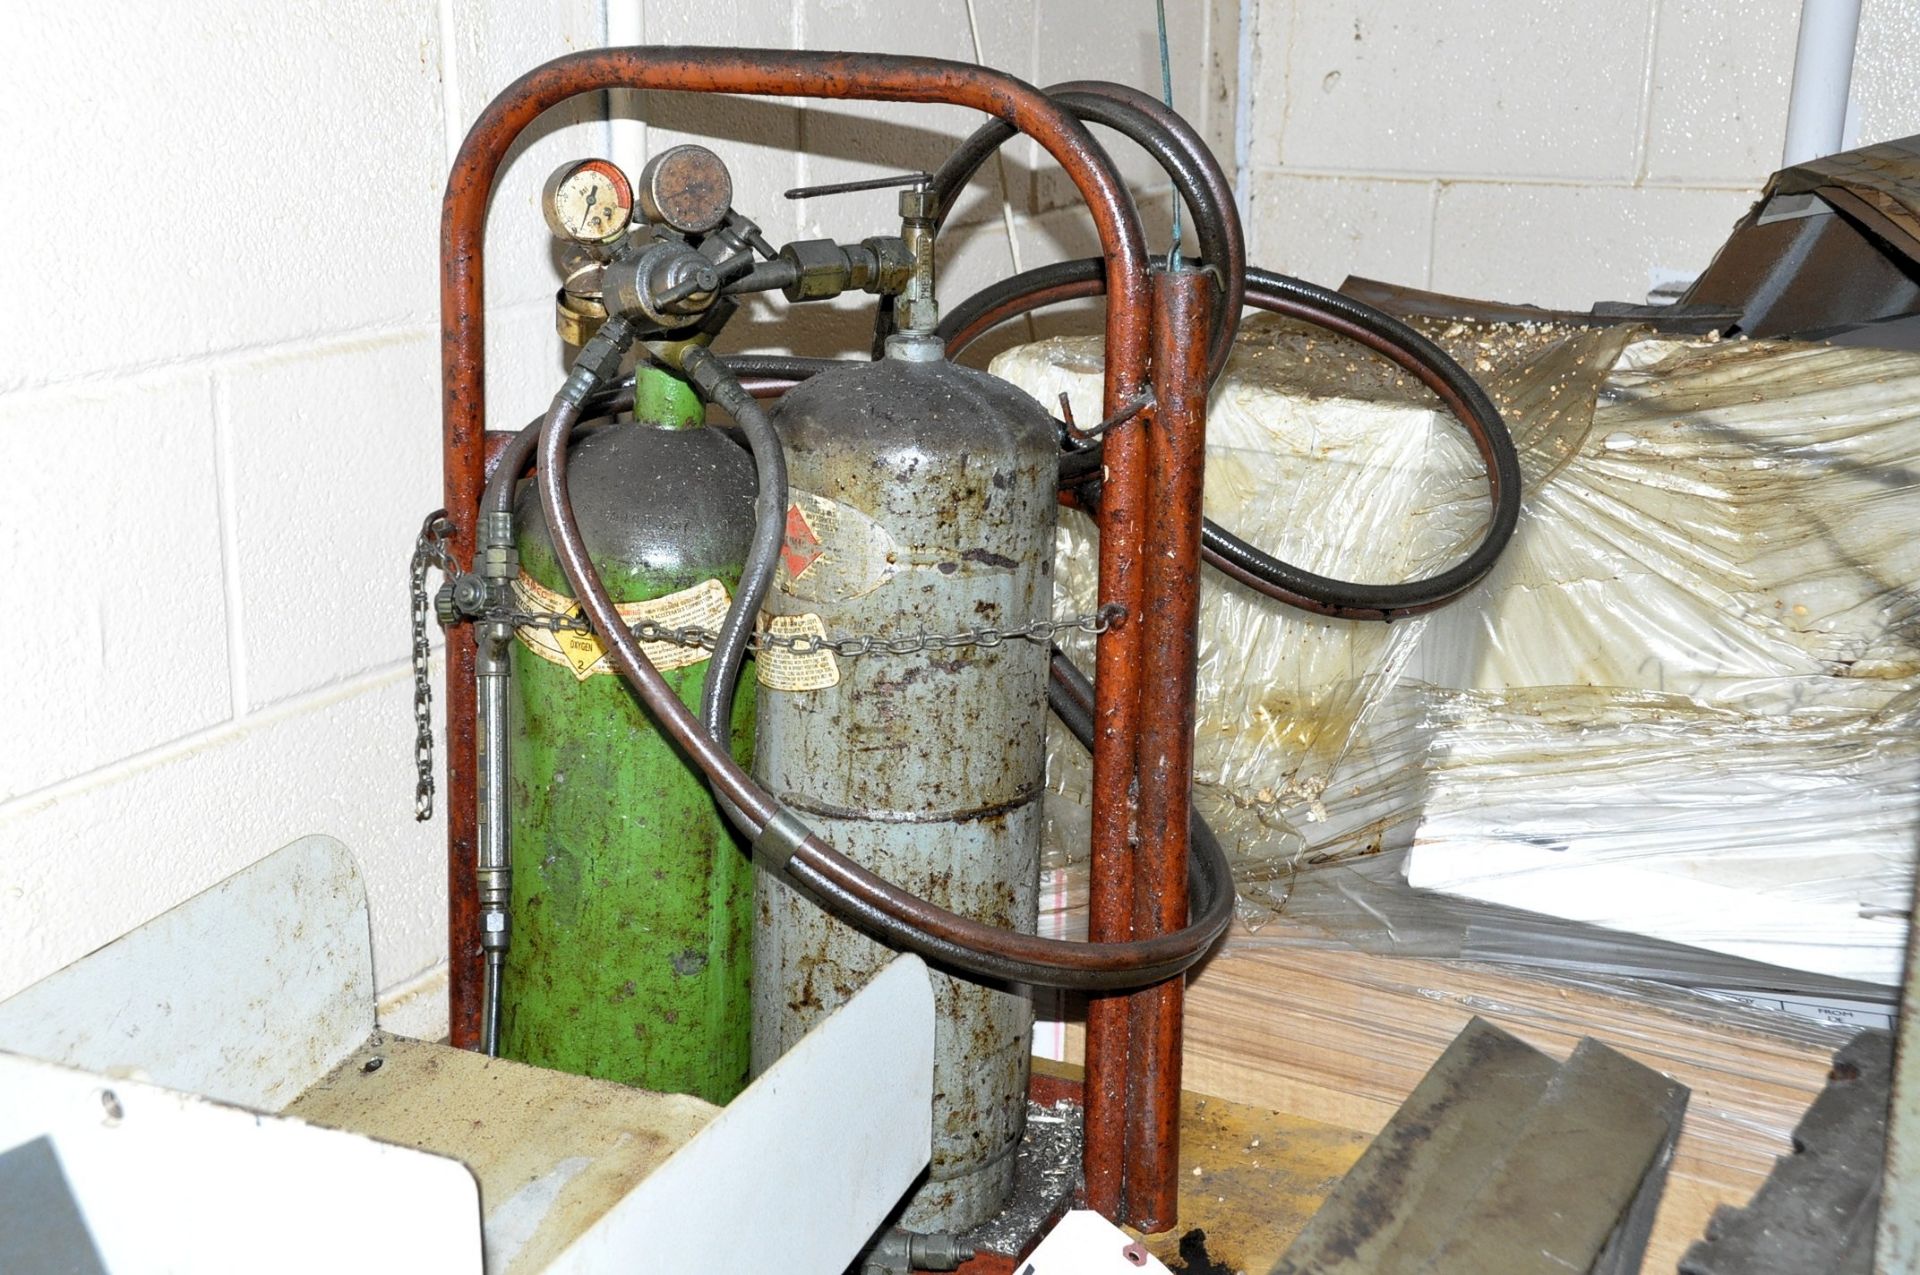 Small Portable Oxygen/Acetylene Torch Outfit with Cart and Tanks;